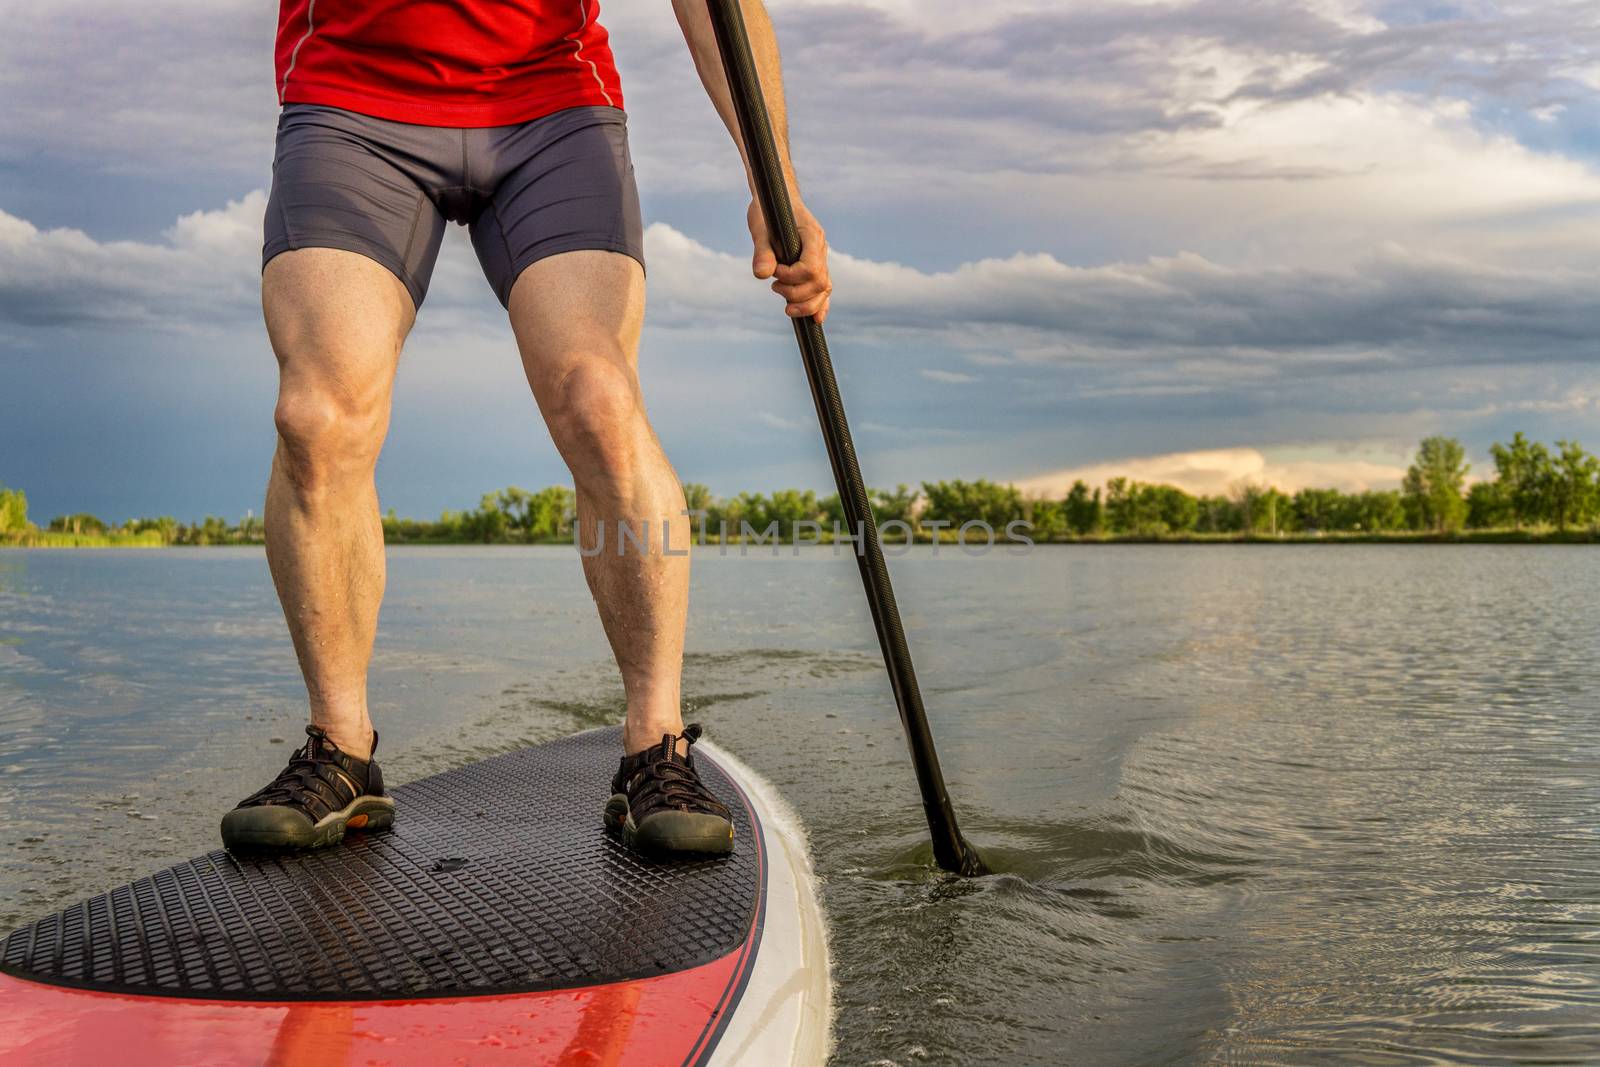 stand up paddling on lake by PixelsAway